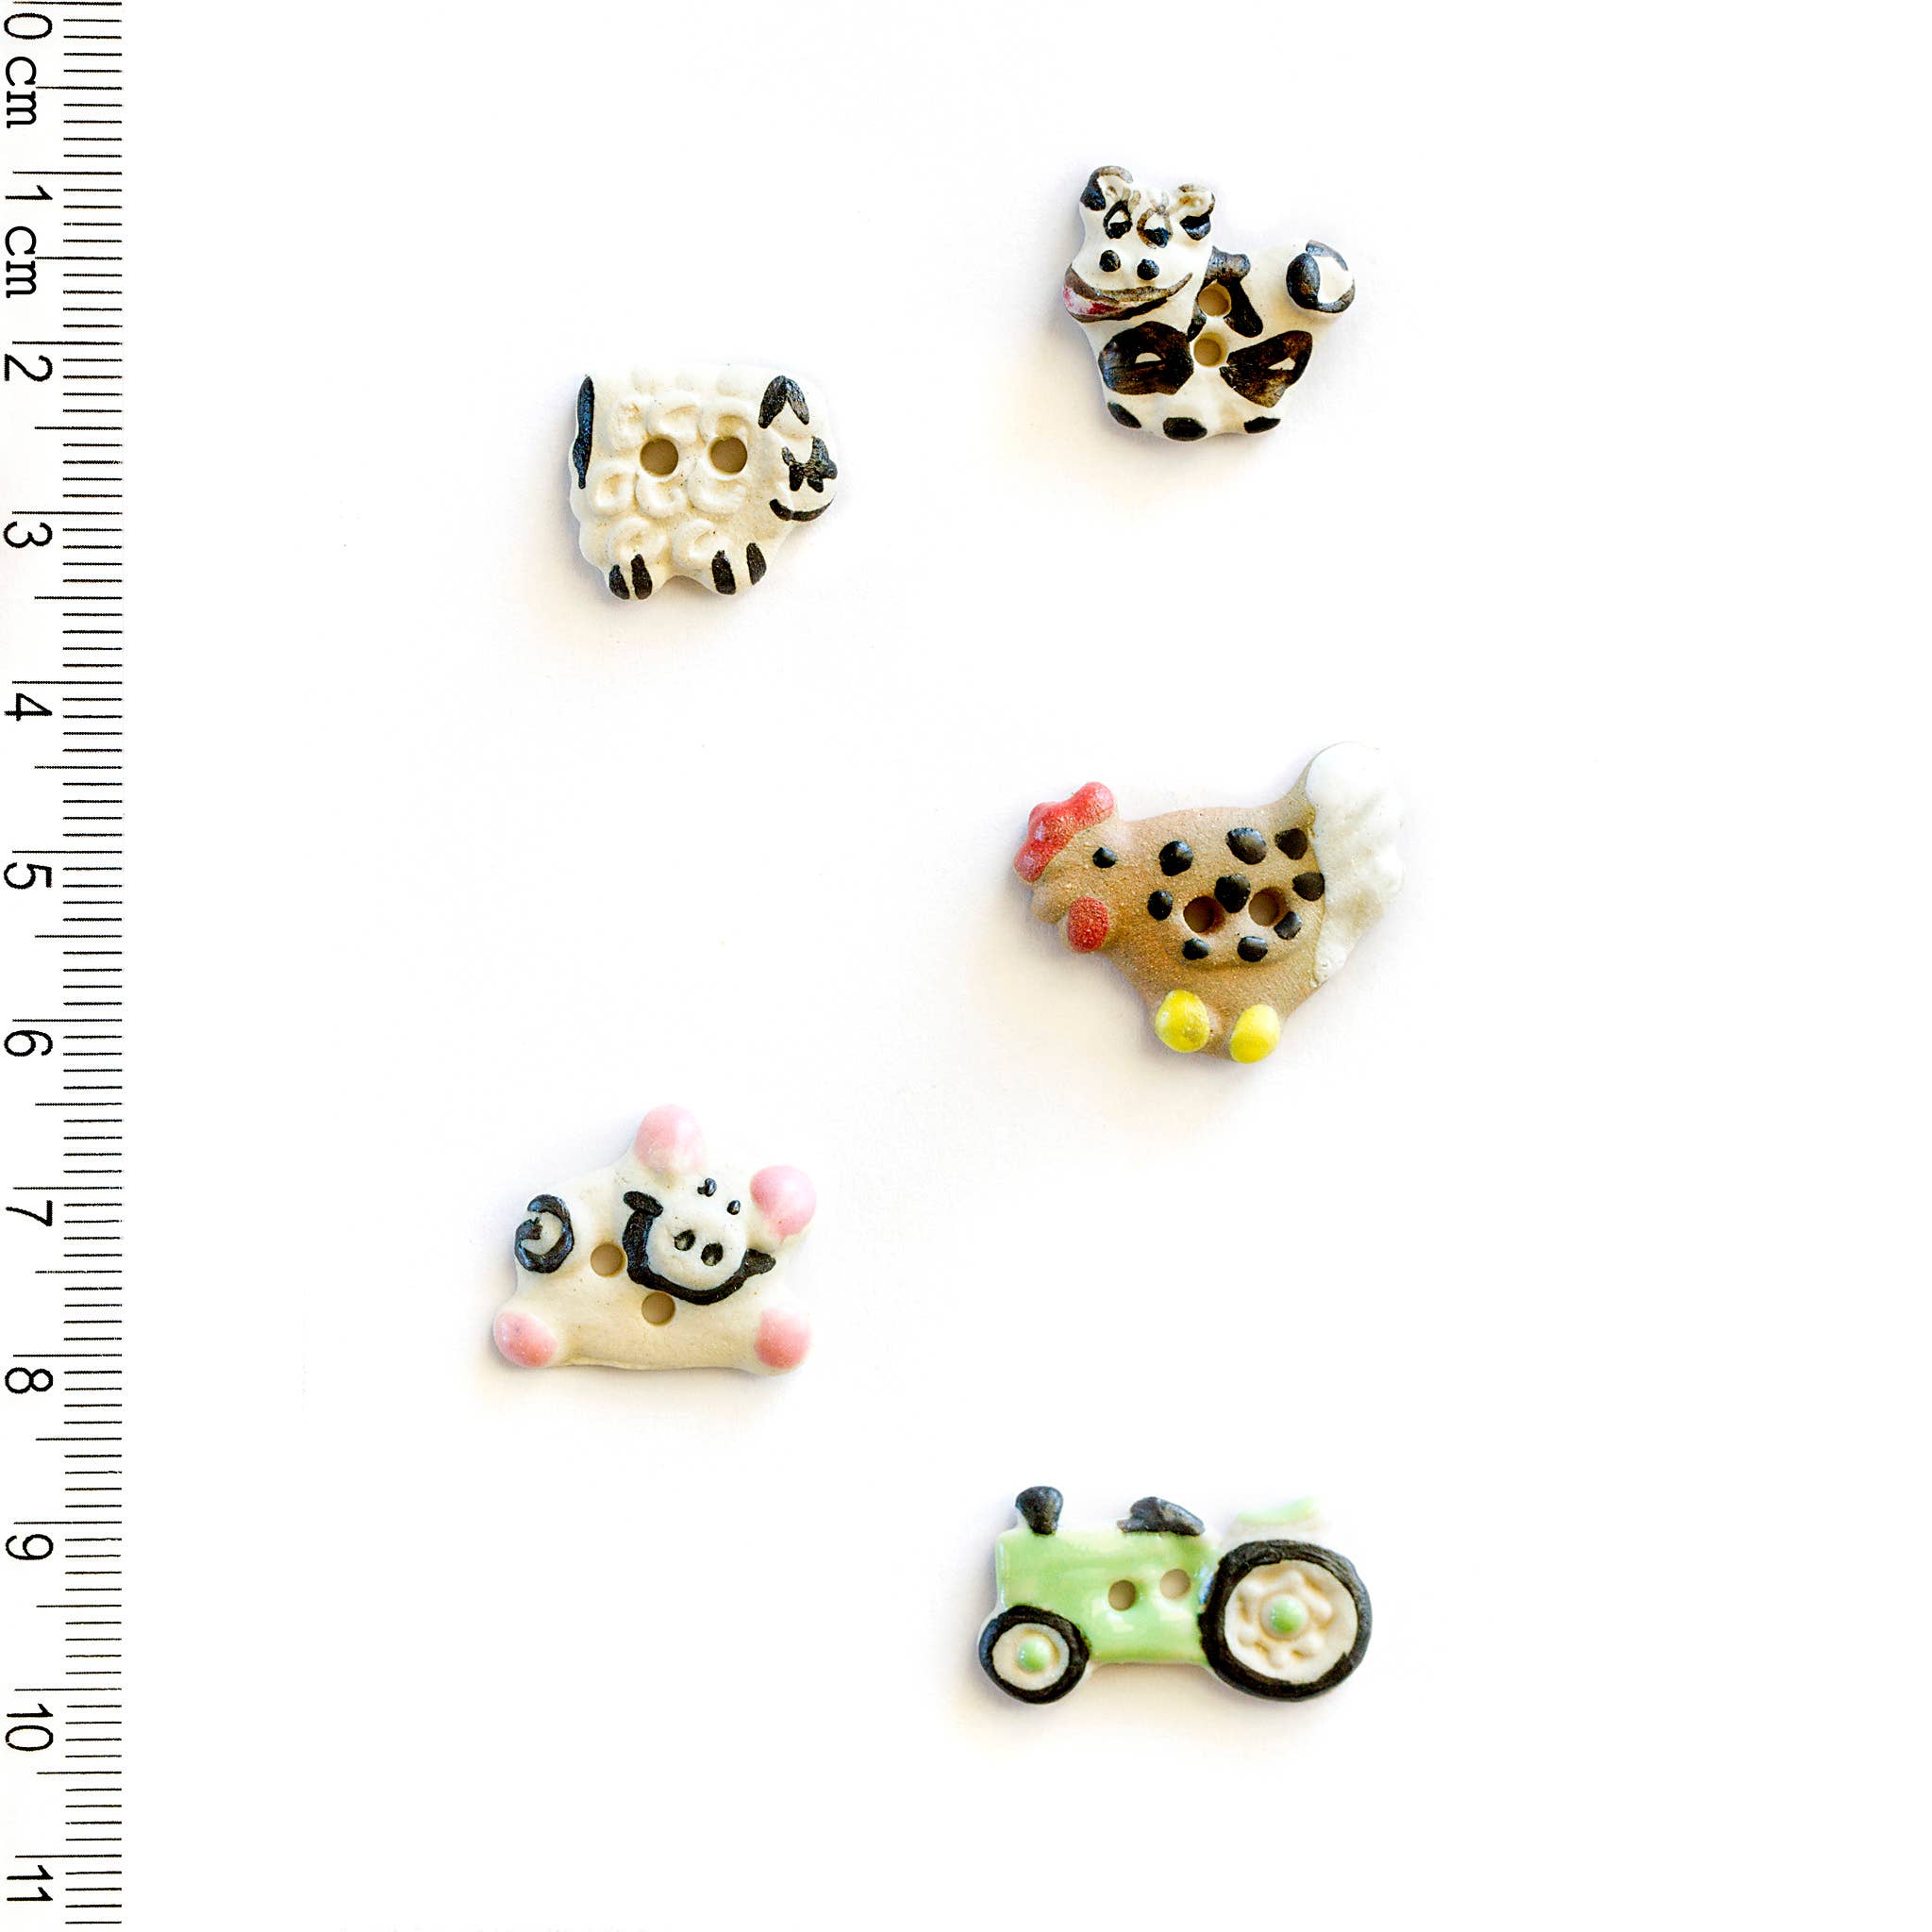 Incomparable Buttons - 5 Farmyard Buttons